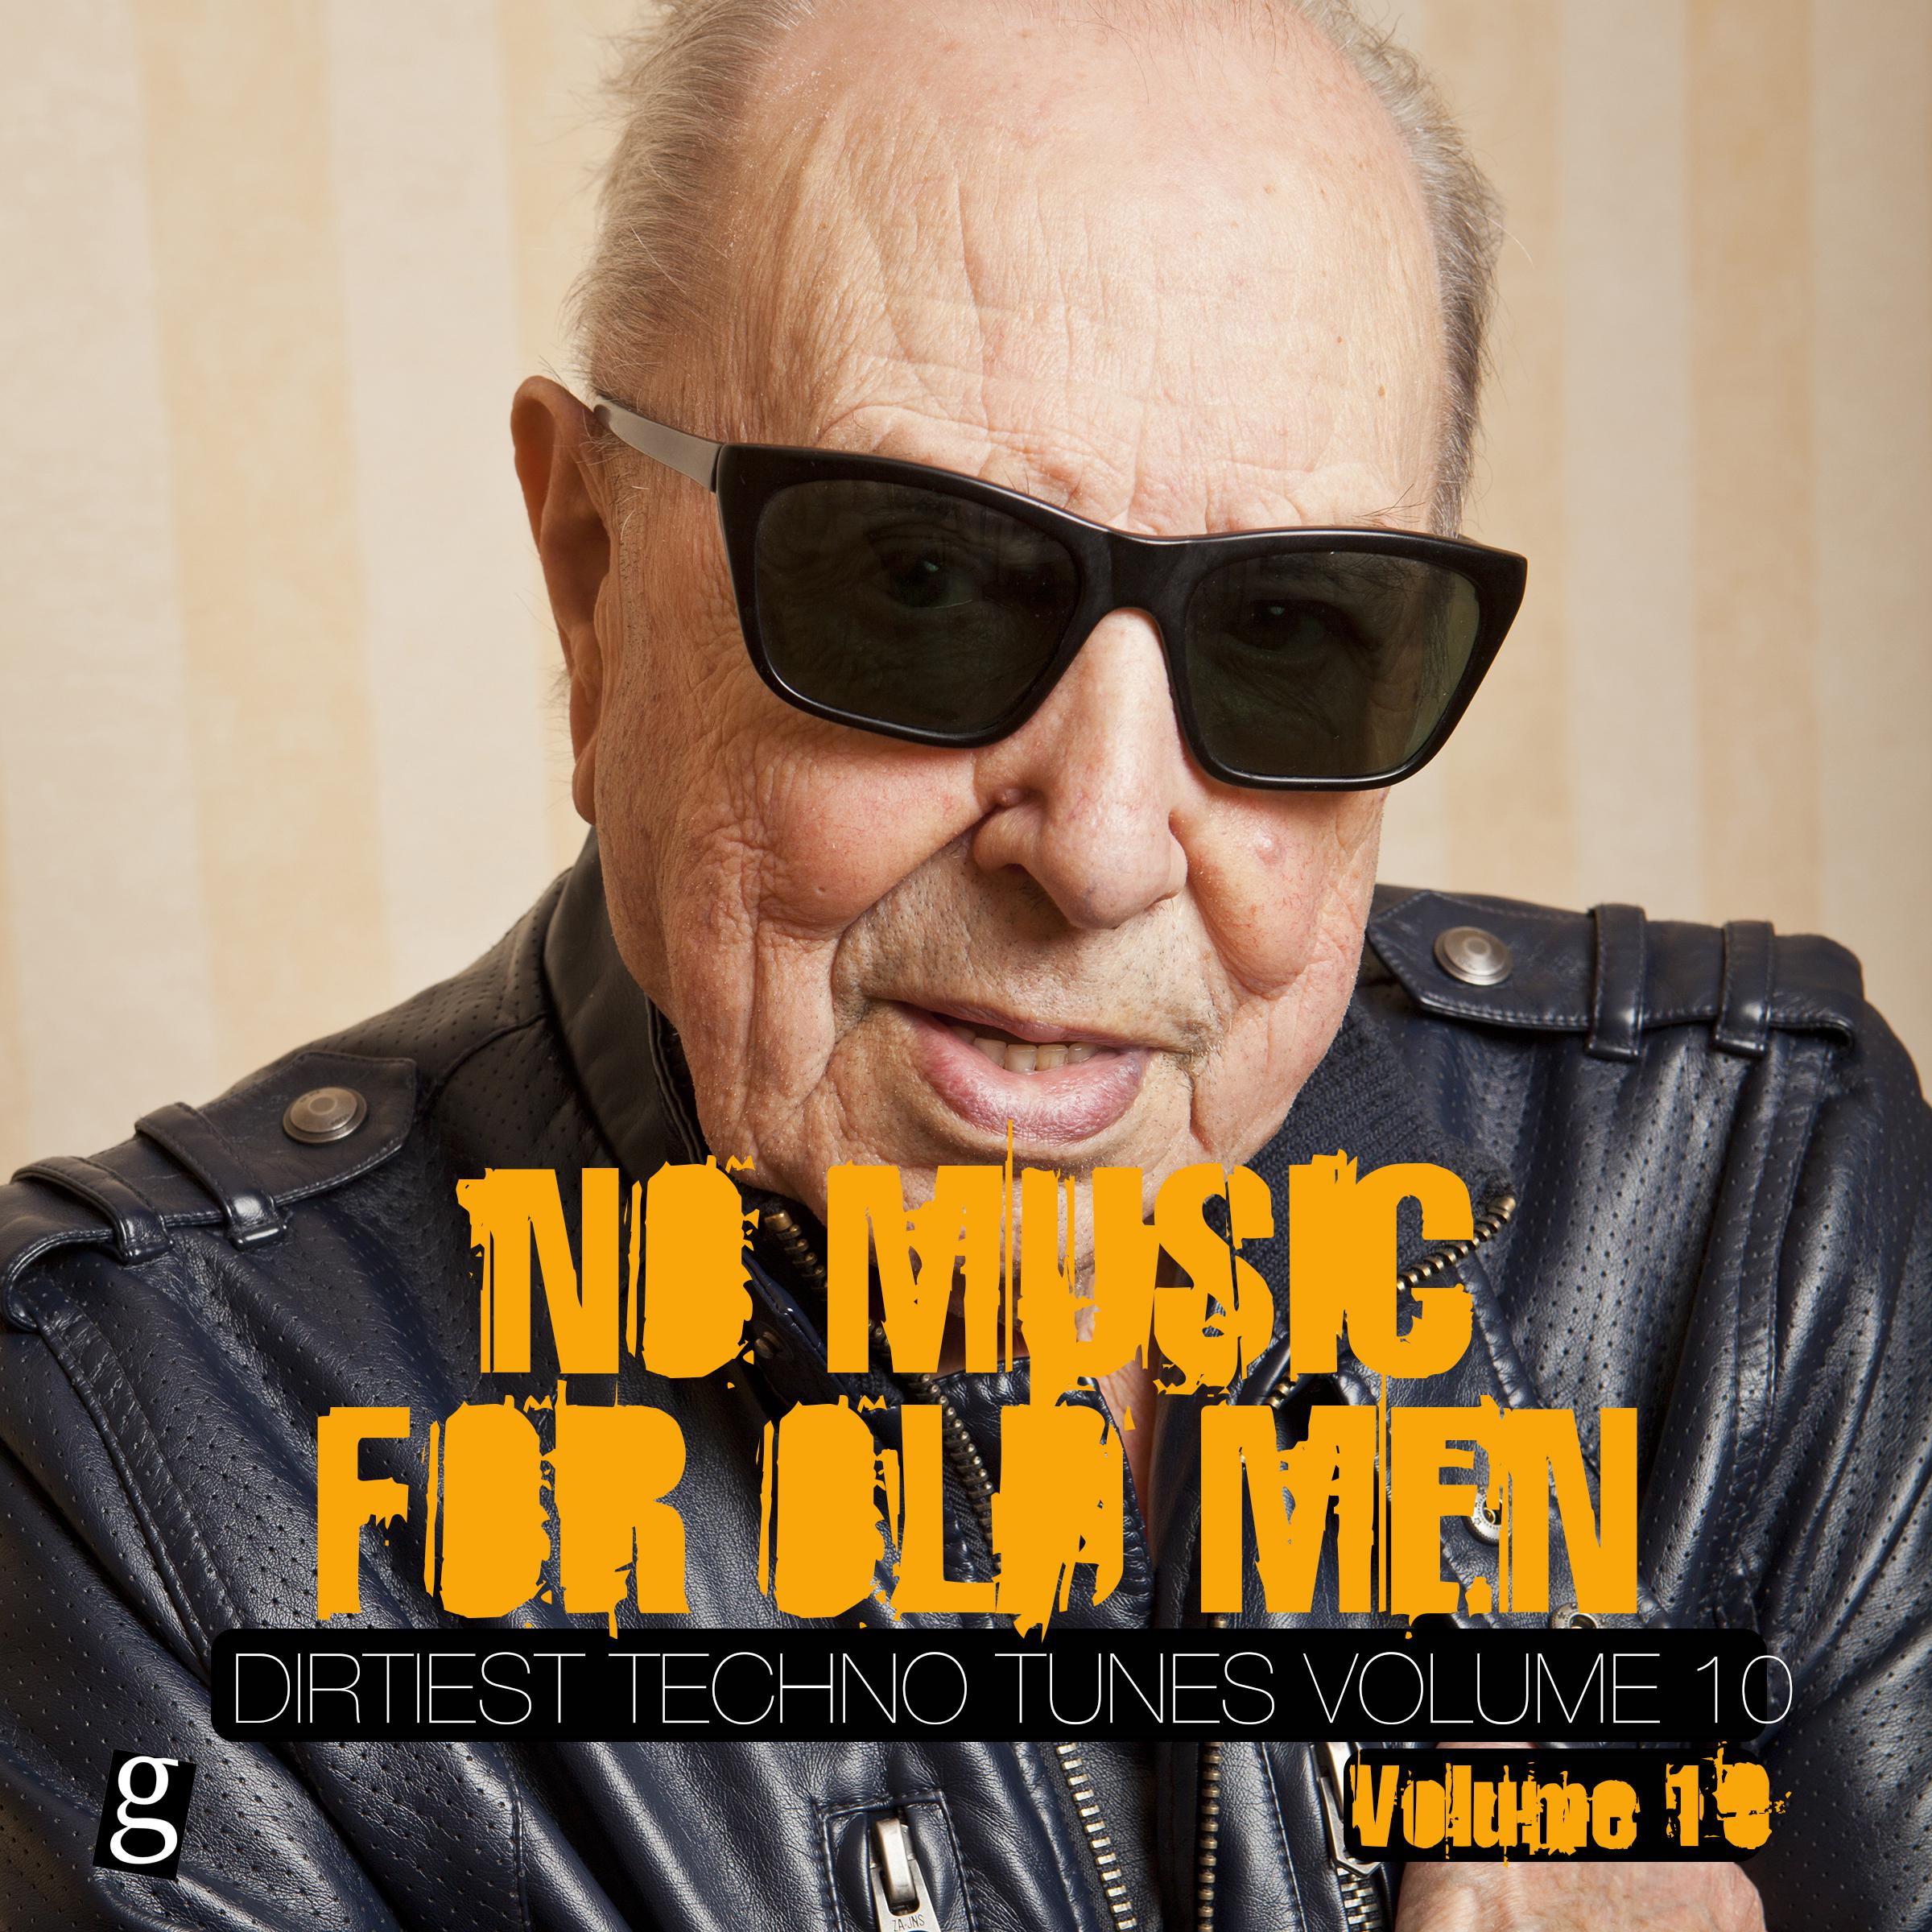 No Music for Old Men, Vol. 10 - Dirtiest Techno Tunes